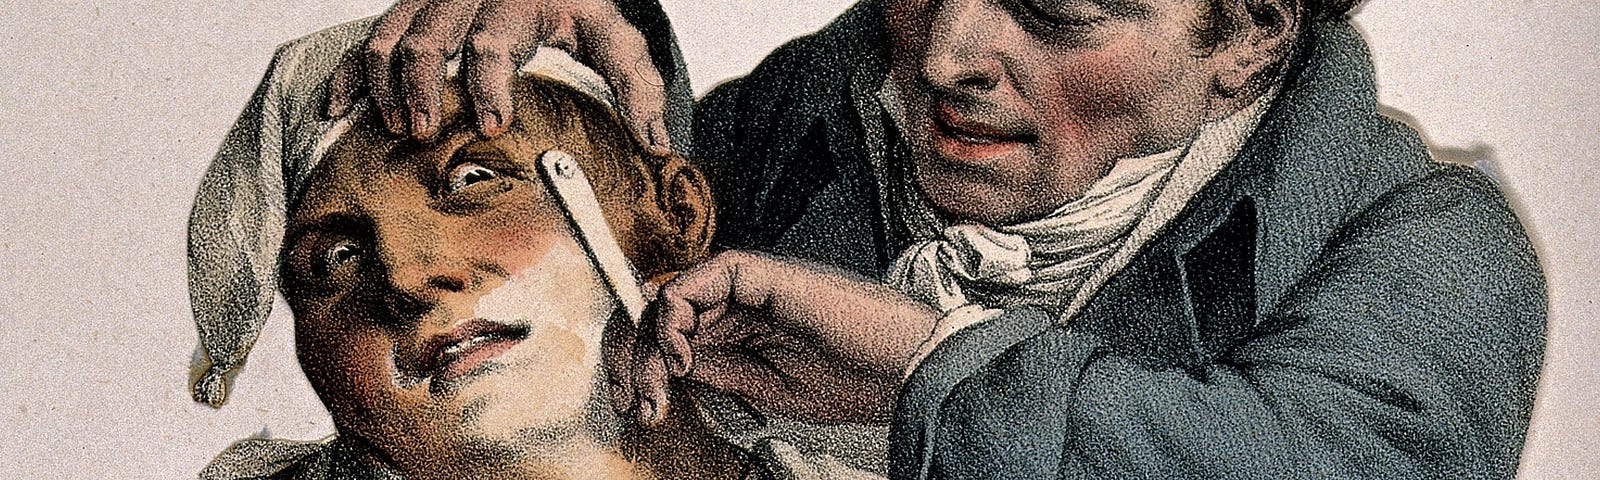 A barber shaving a man who looks extremely fearful.